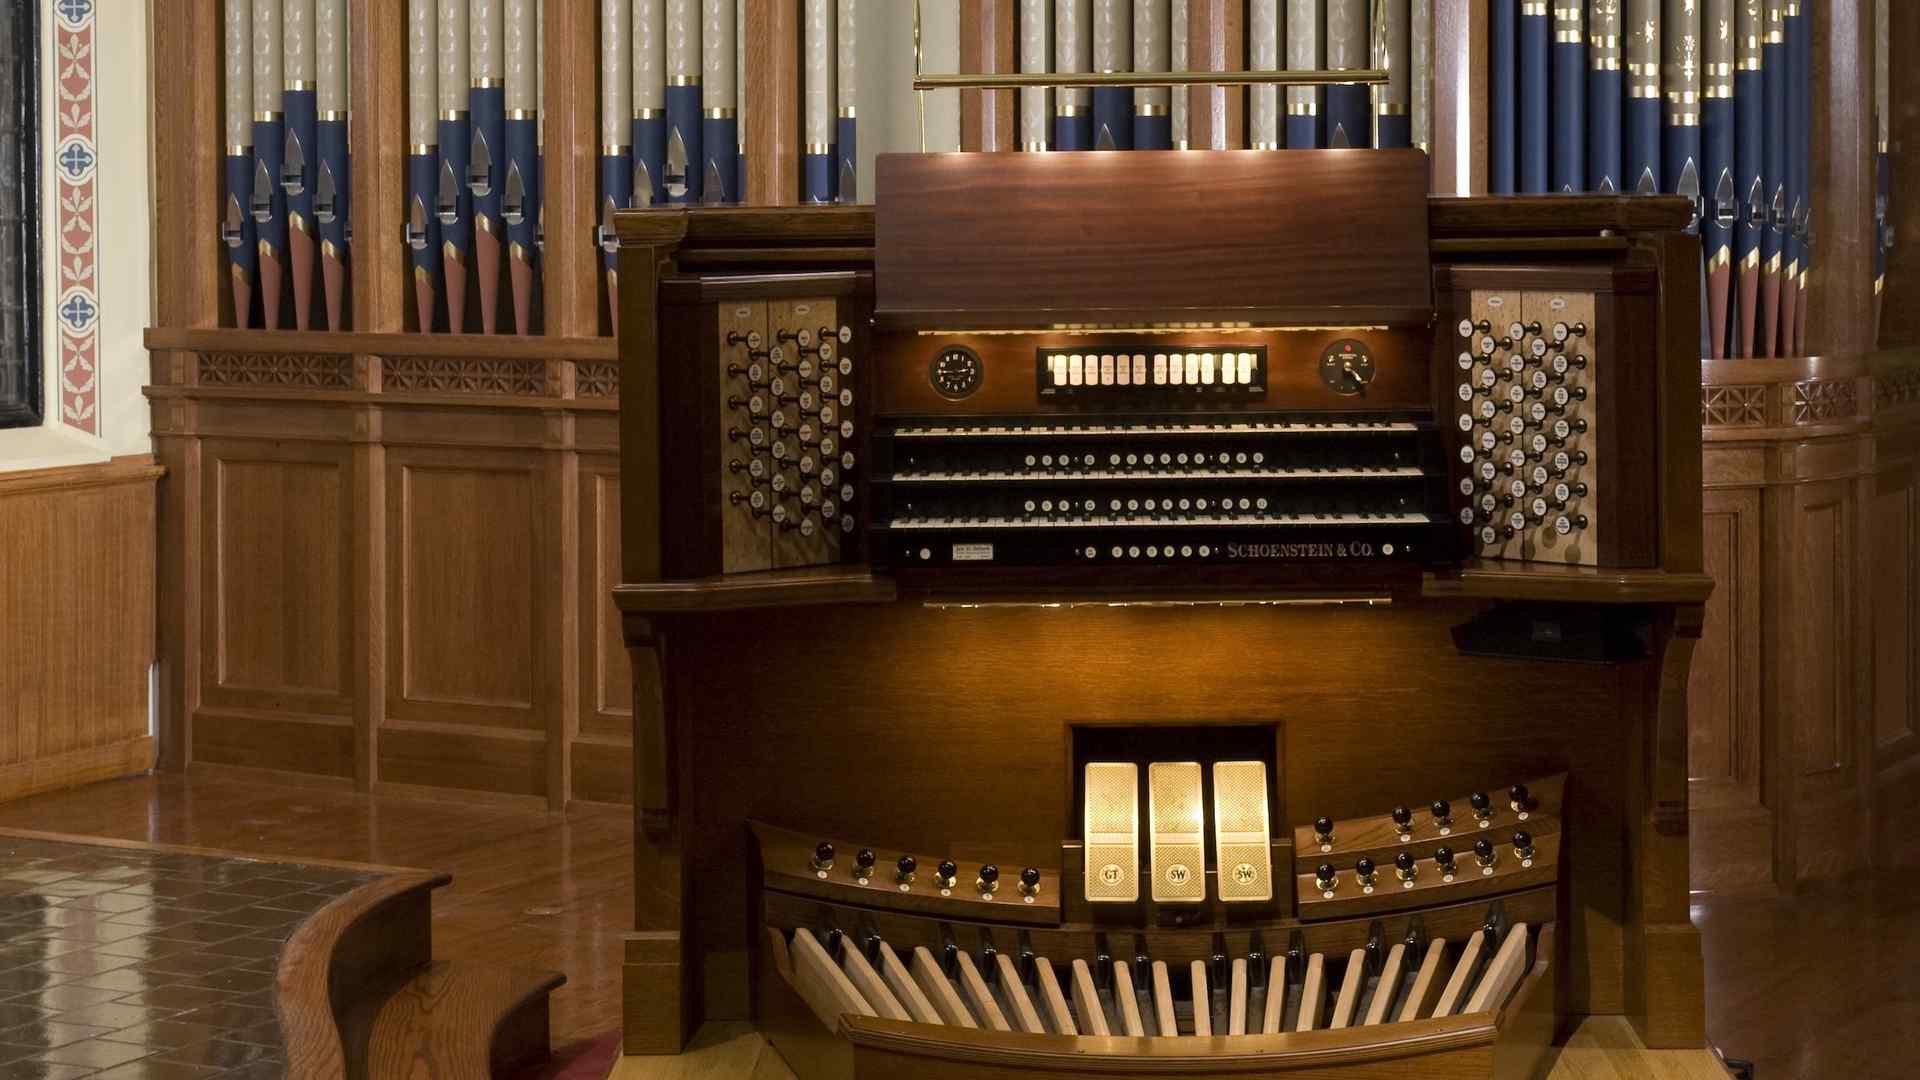 The organ console and behind it the pipes and case